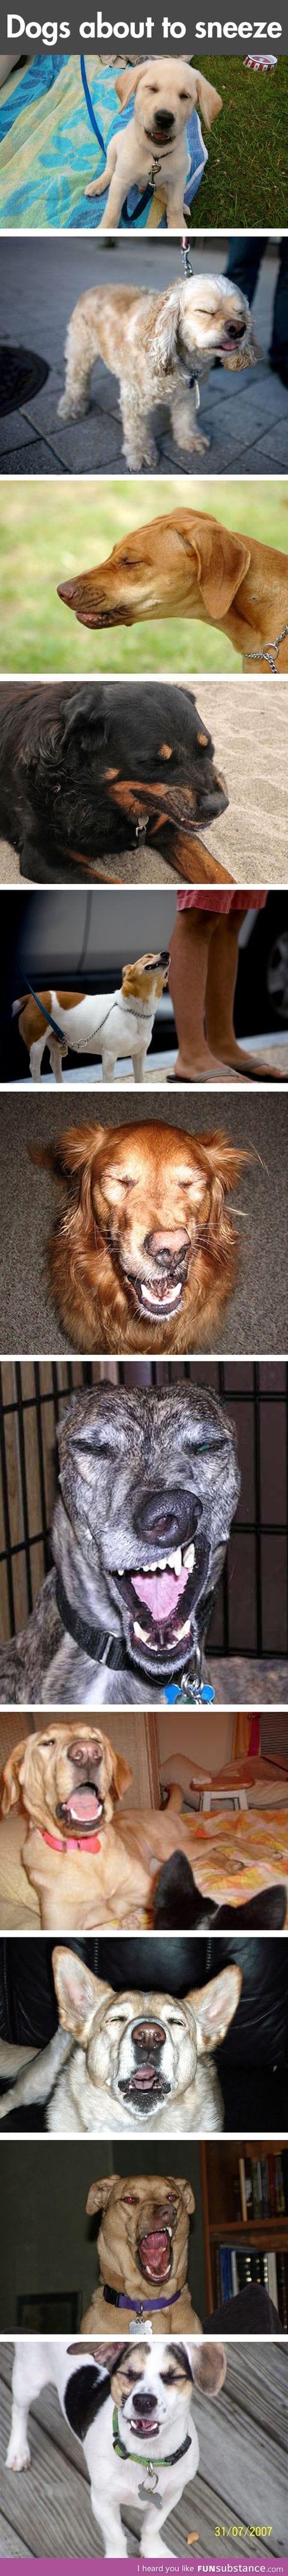 Dogs about to sneeze